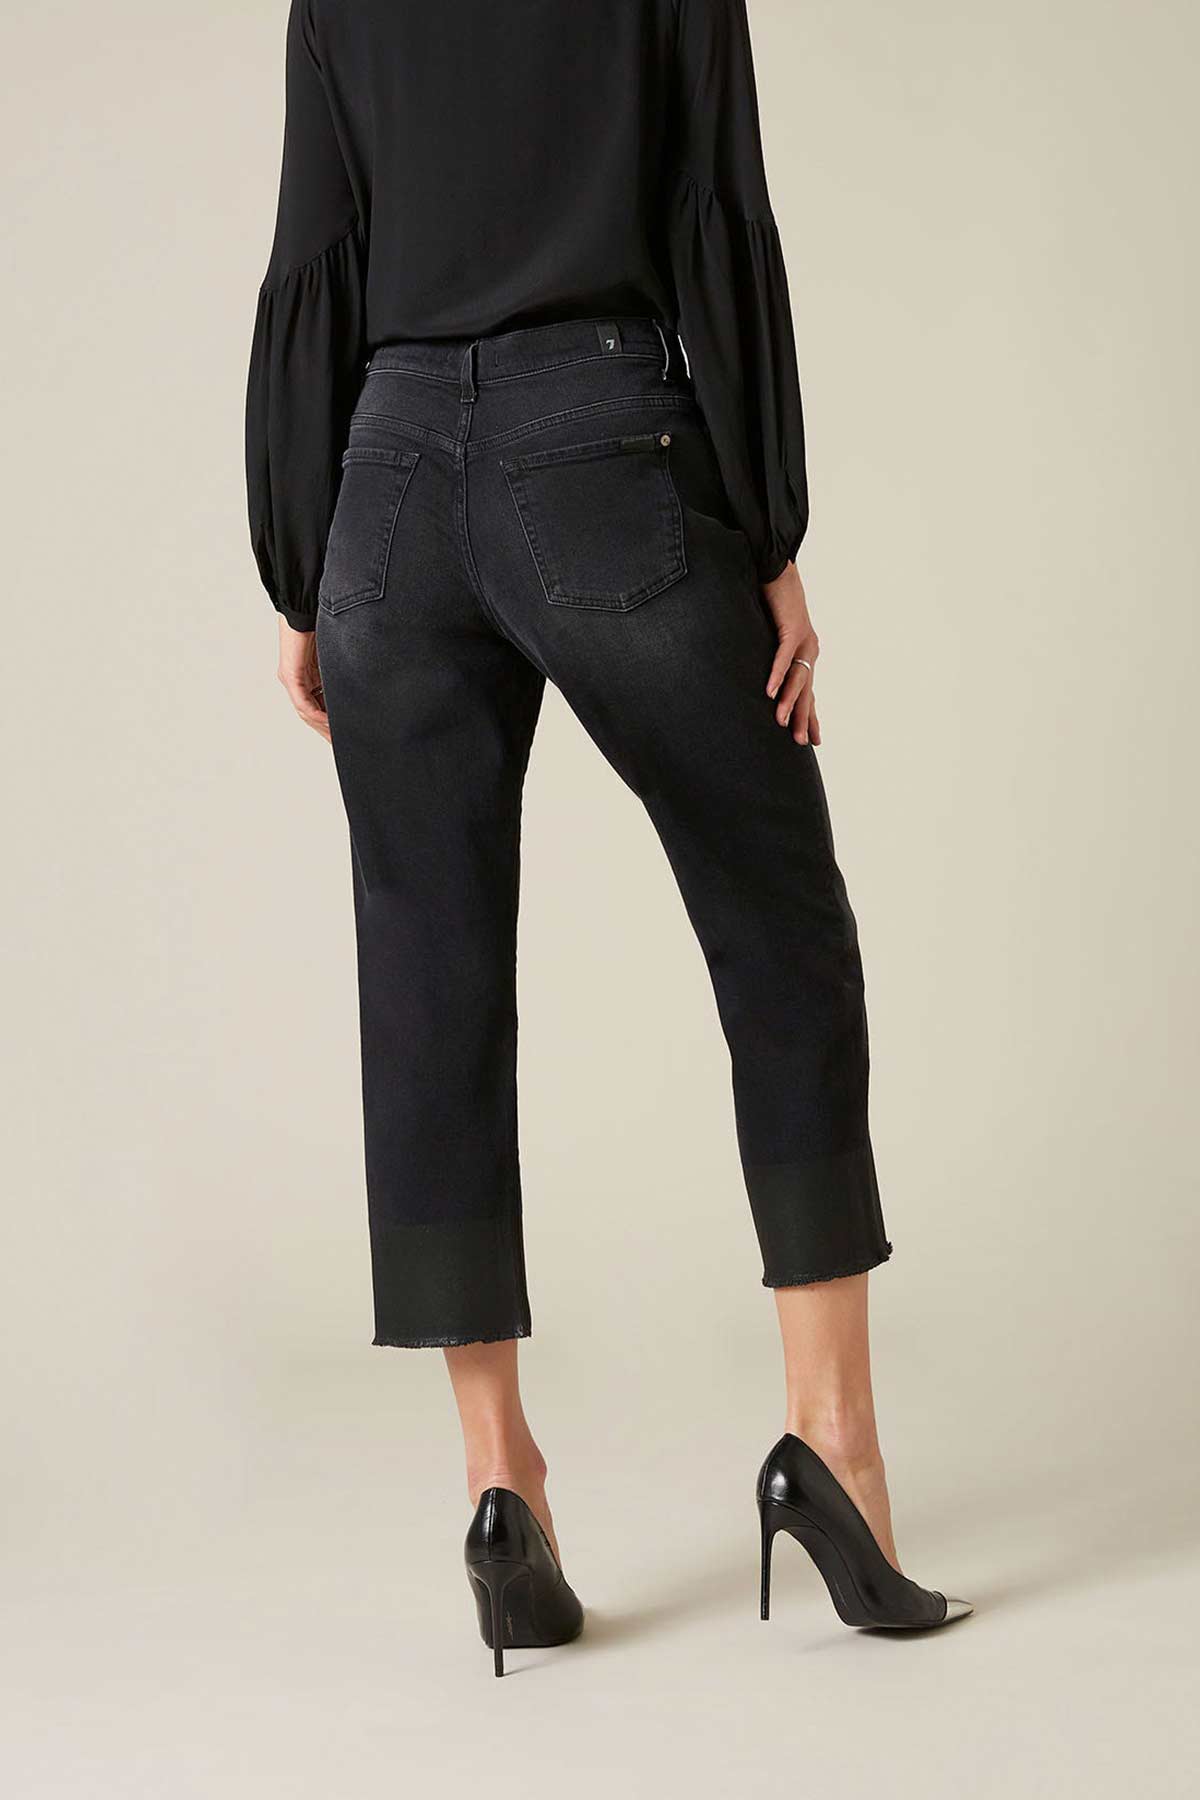 7 For All Mankind Modern Straight Jeans-Libas Trendy Fashion Store